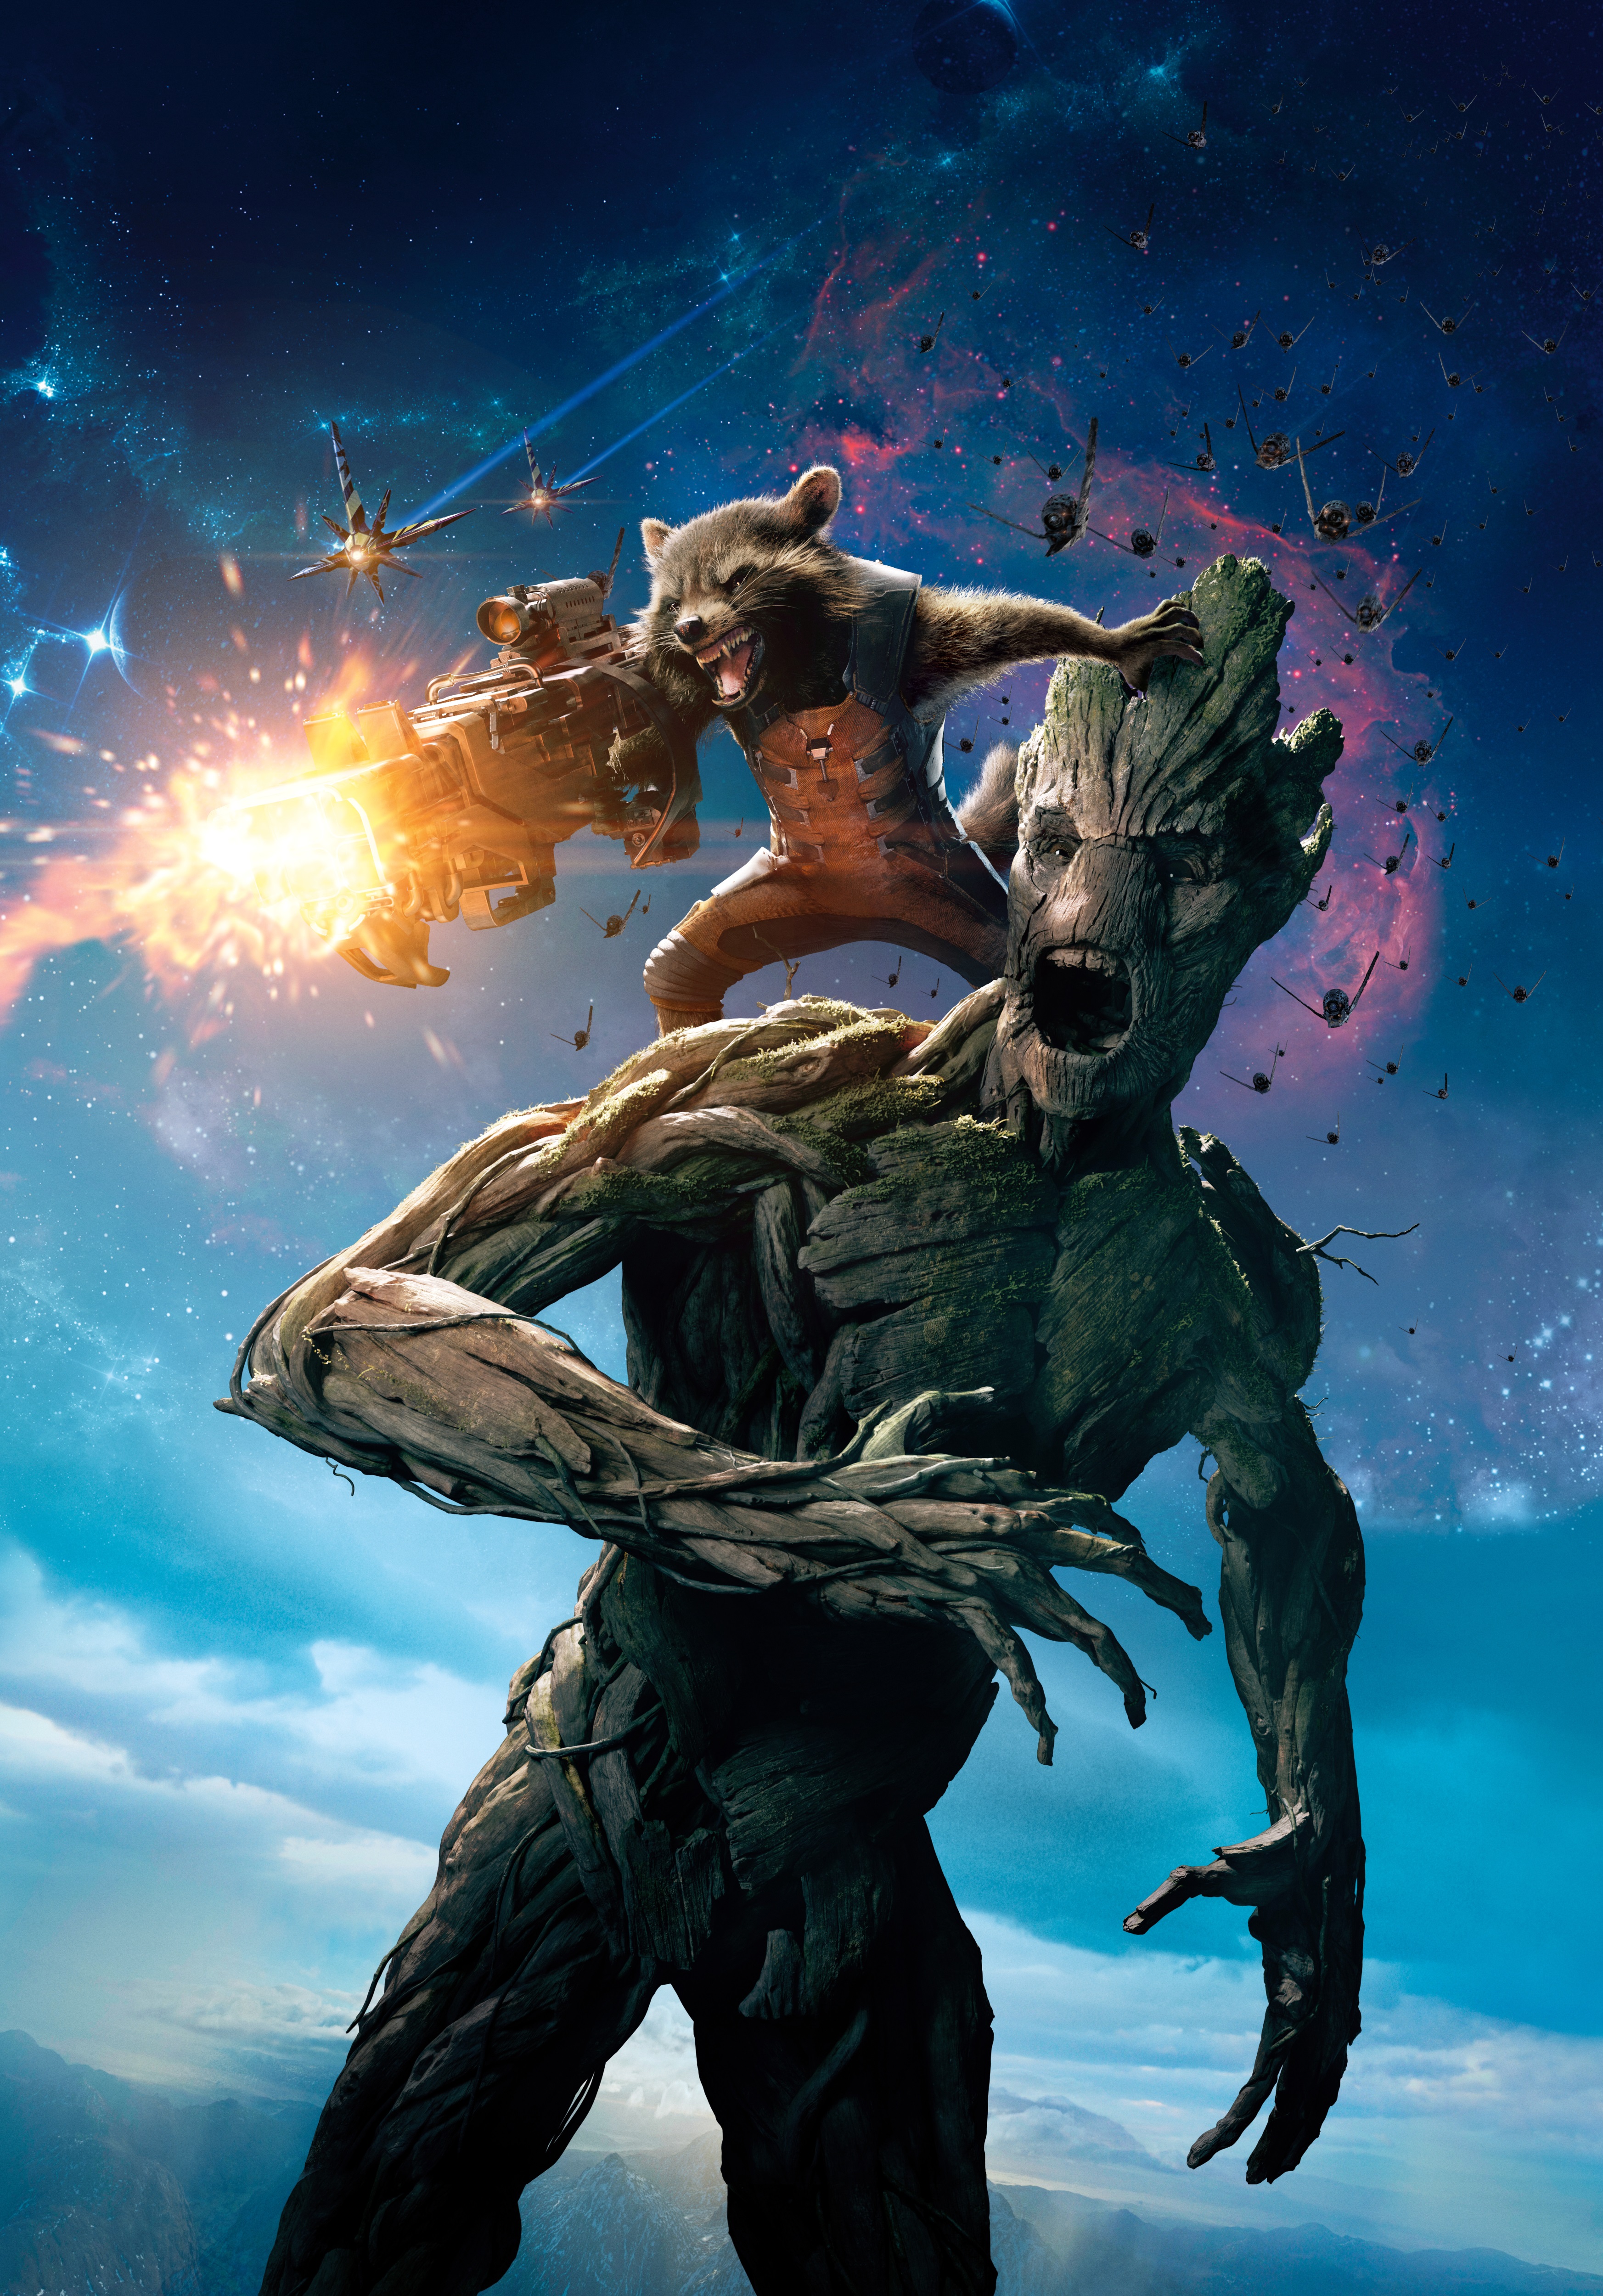 Rocket Raccoon And Groot From Guardians Of The Galaxy Wallpaper